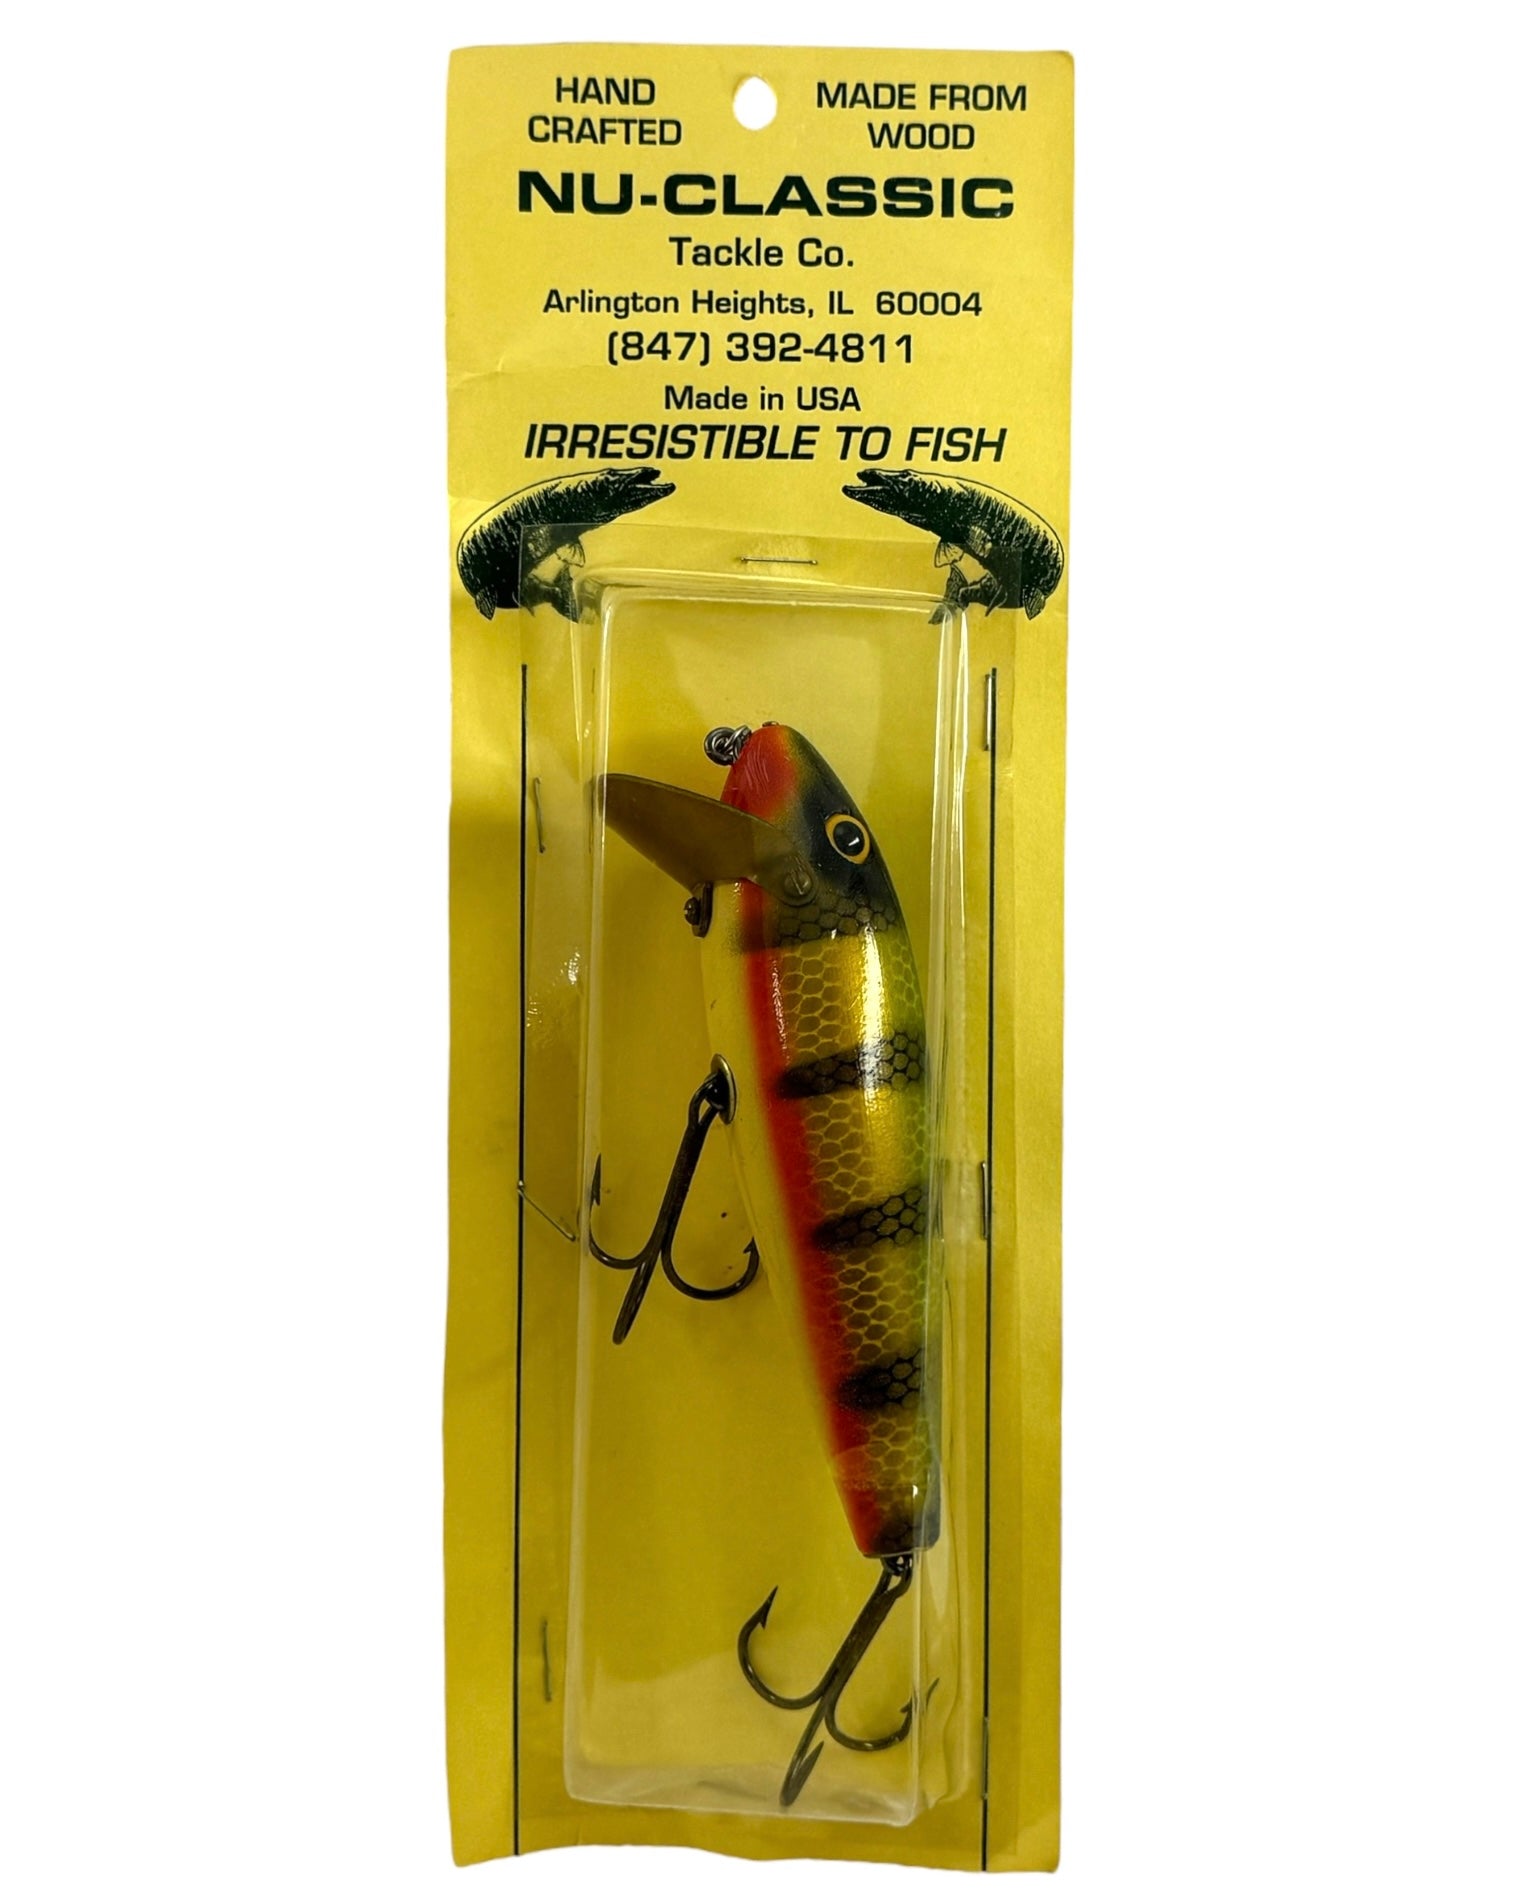 NU-CLASSIC TACKLE COMPANY Handcrafted 5 Fishing Lure PERCH – Toad